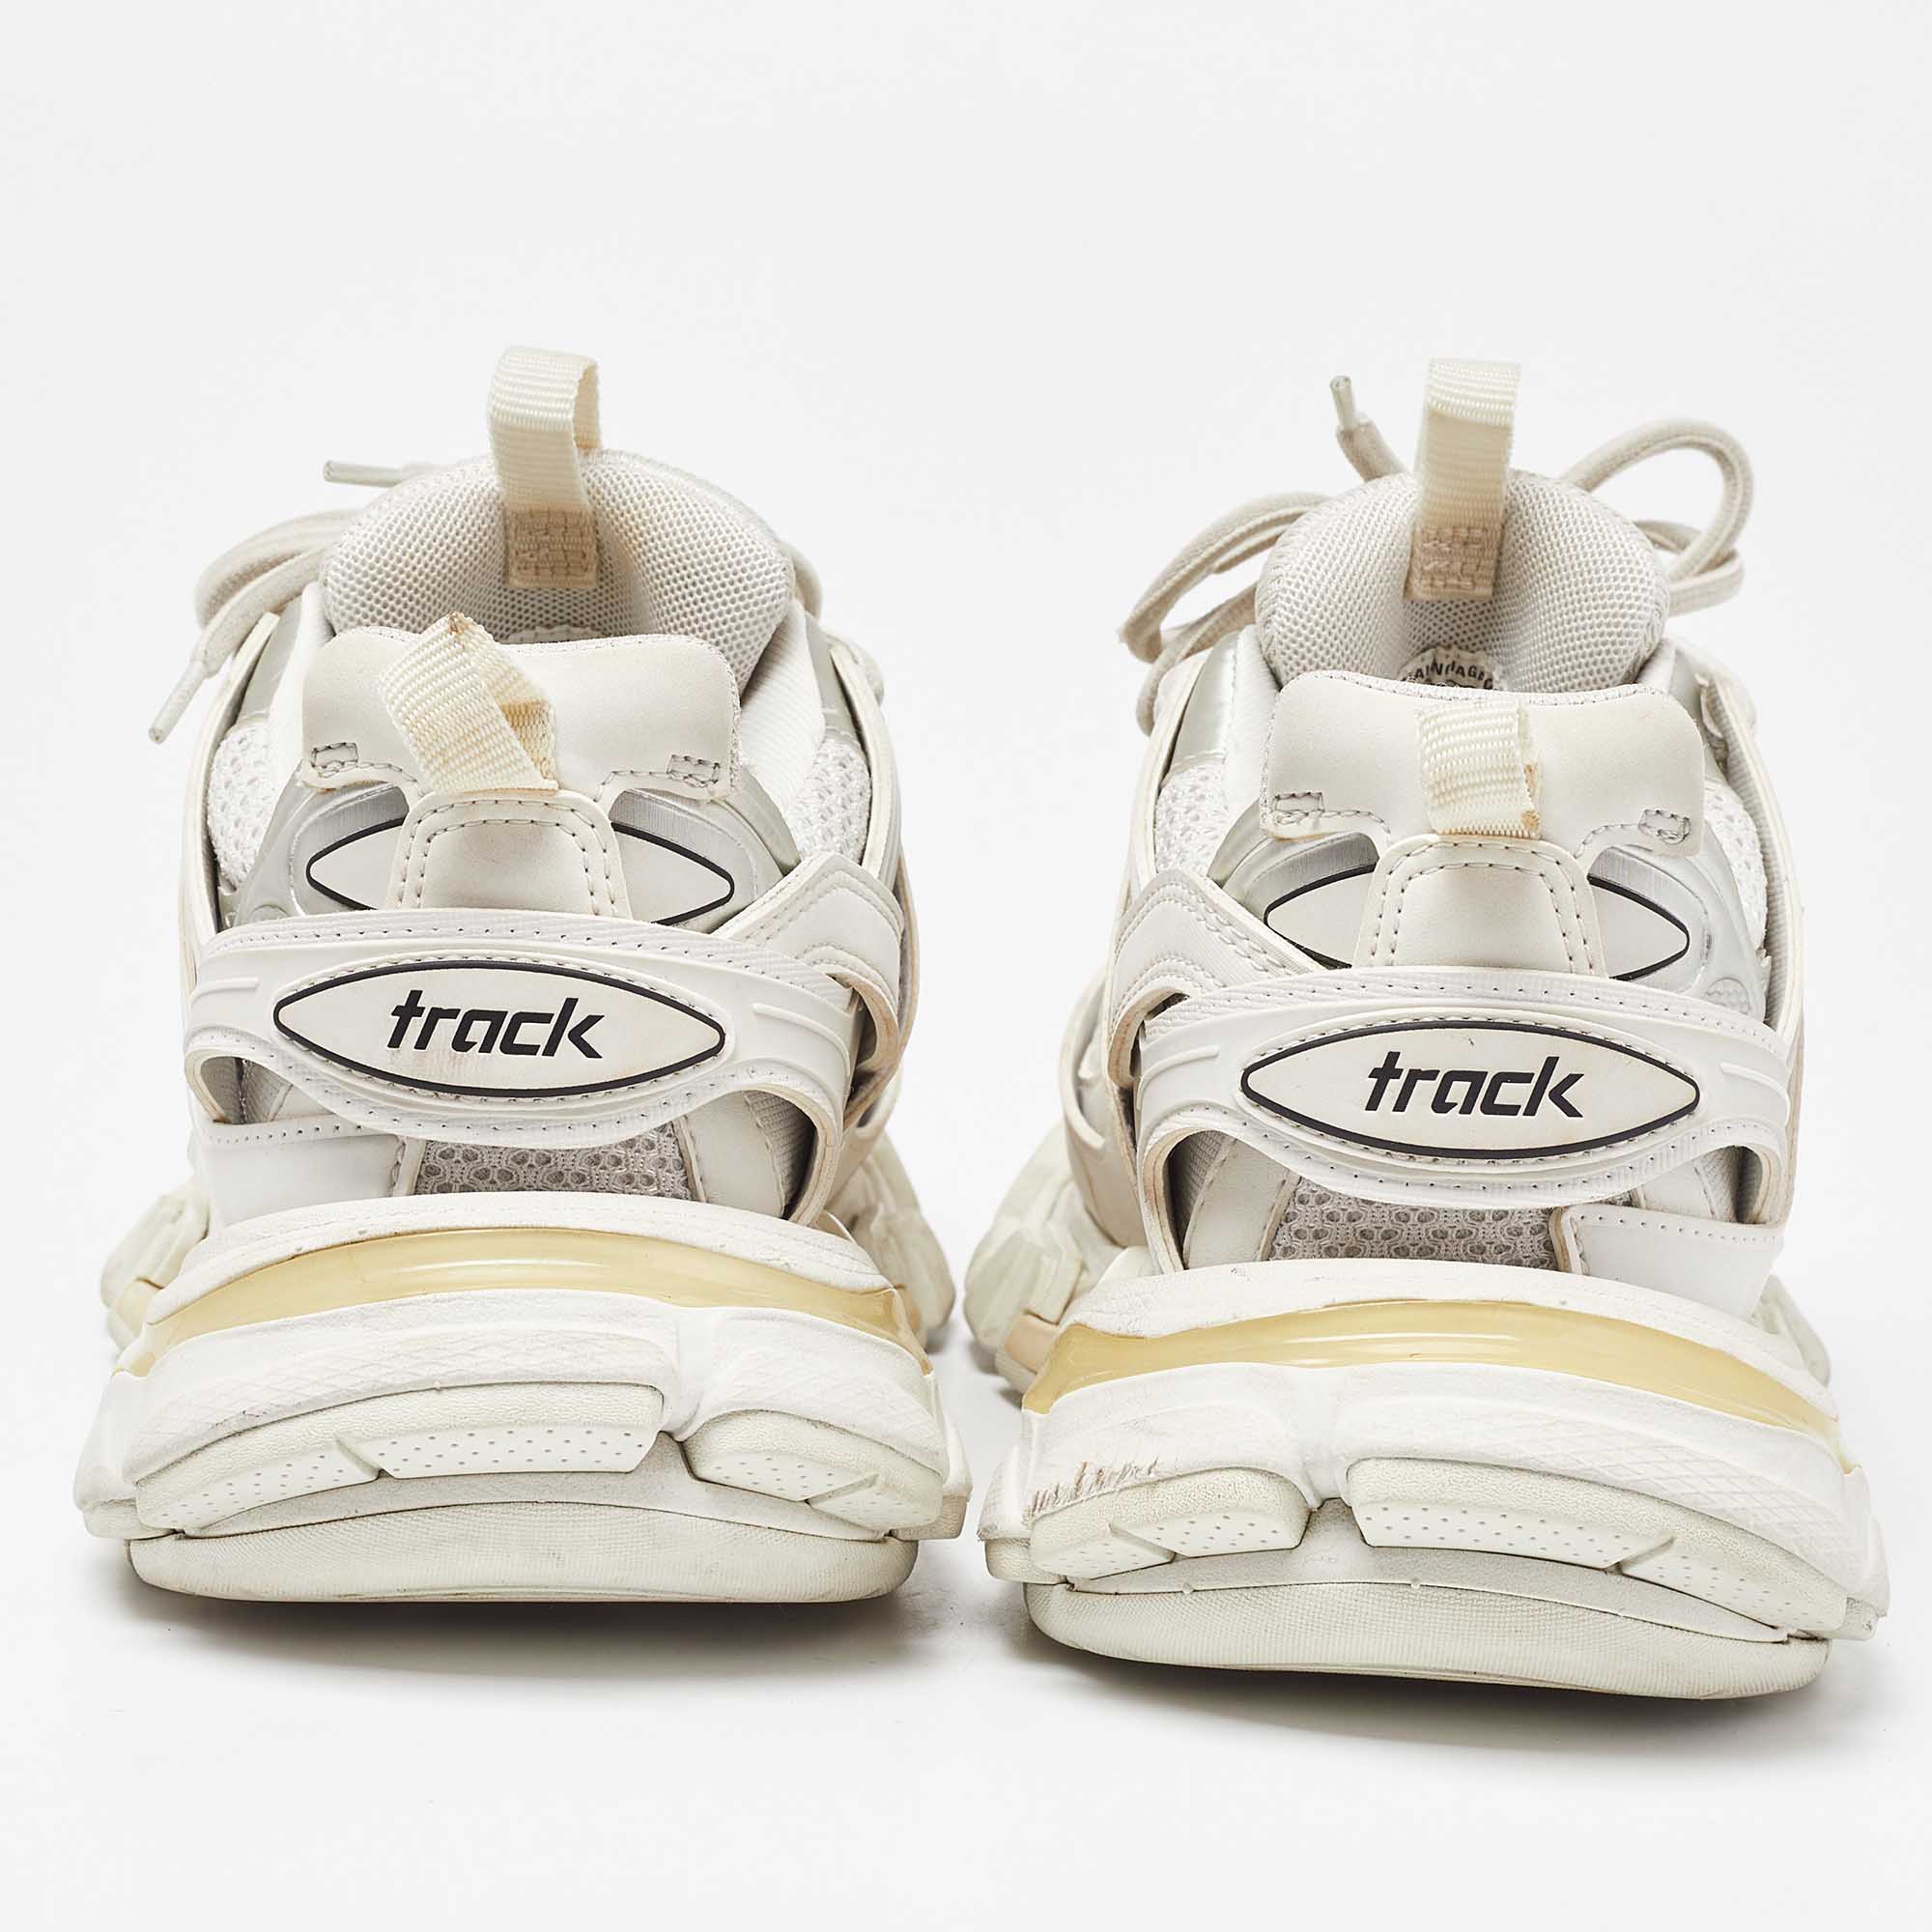 Balenciaga White Leather And Mesh Track Sneakers Size 36